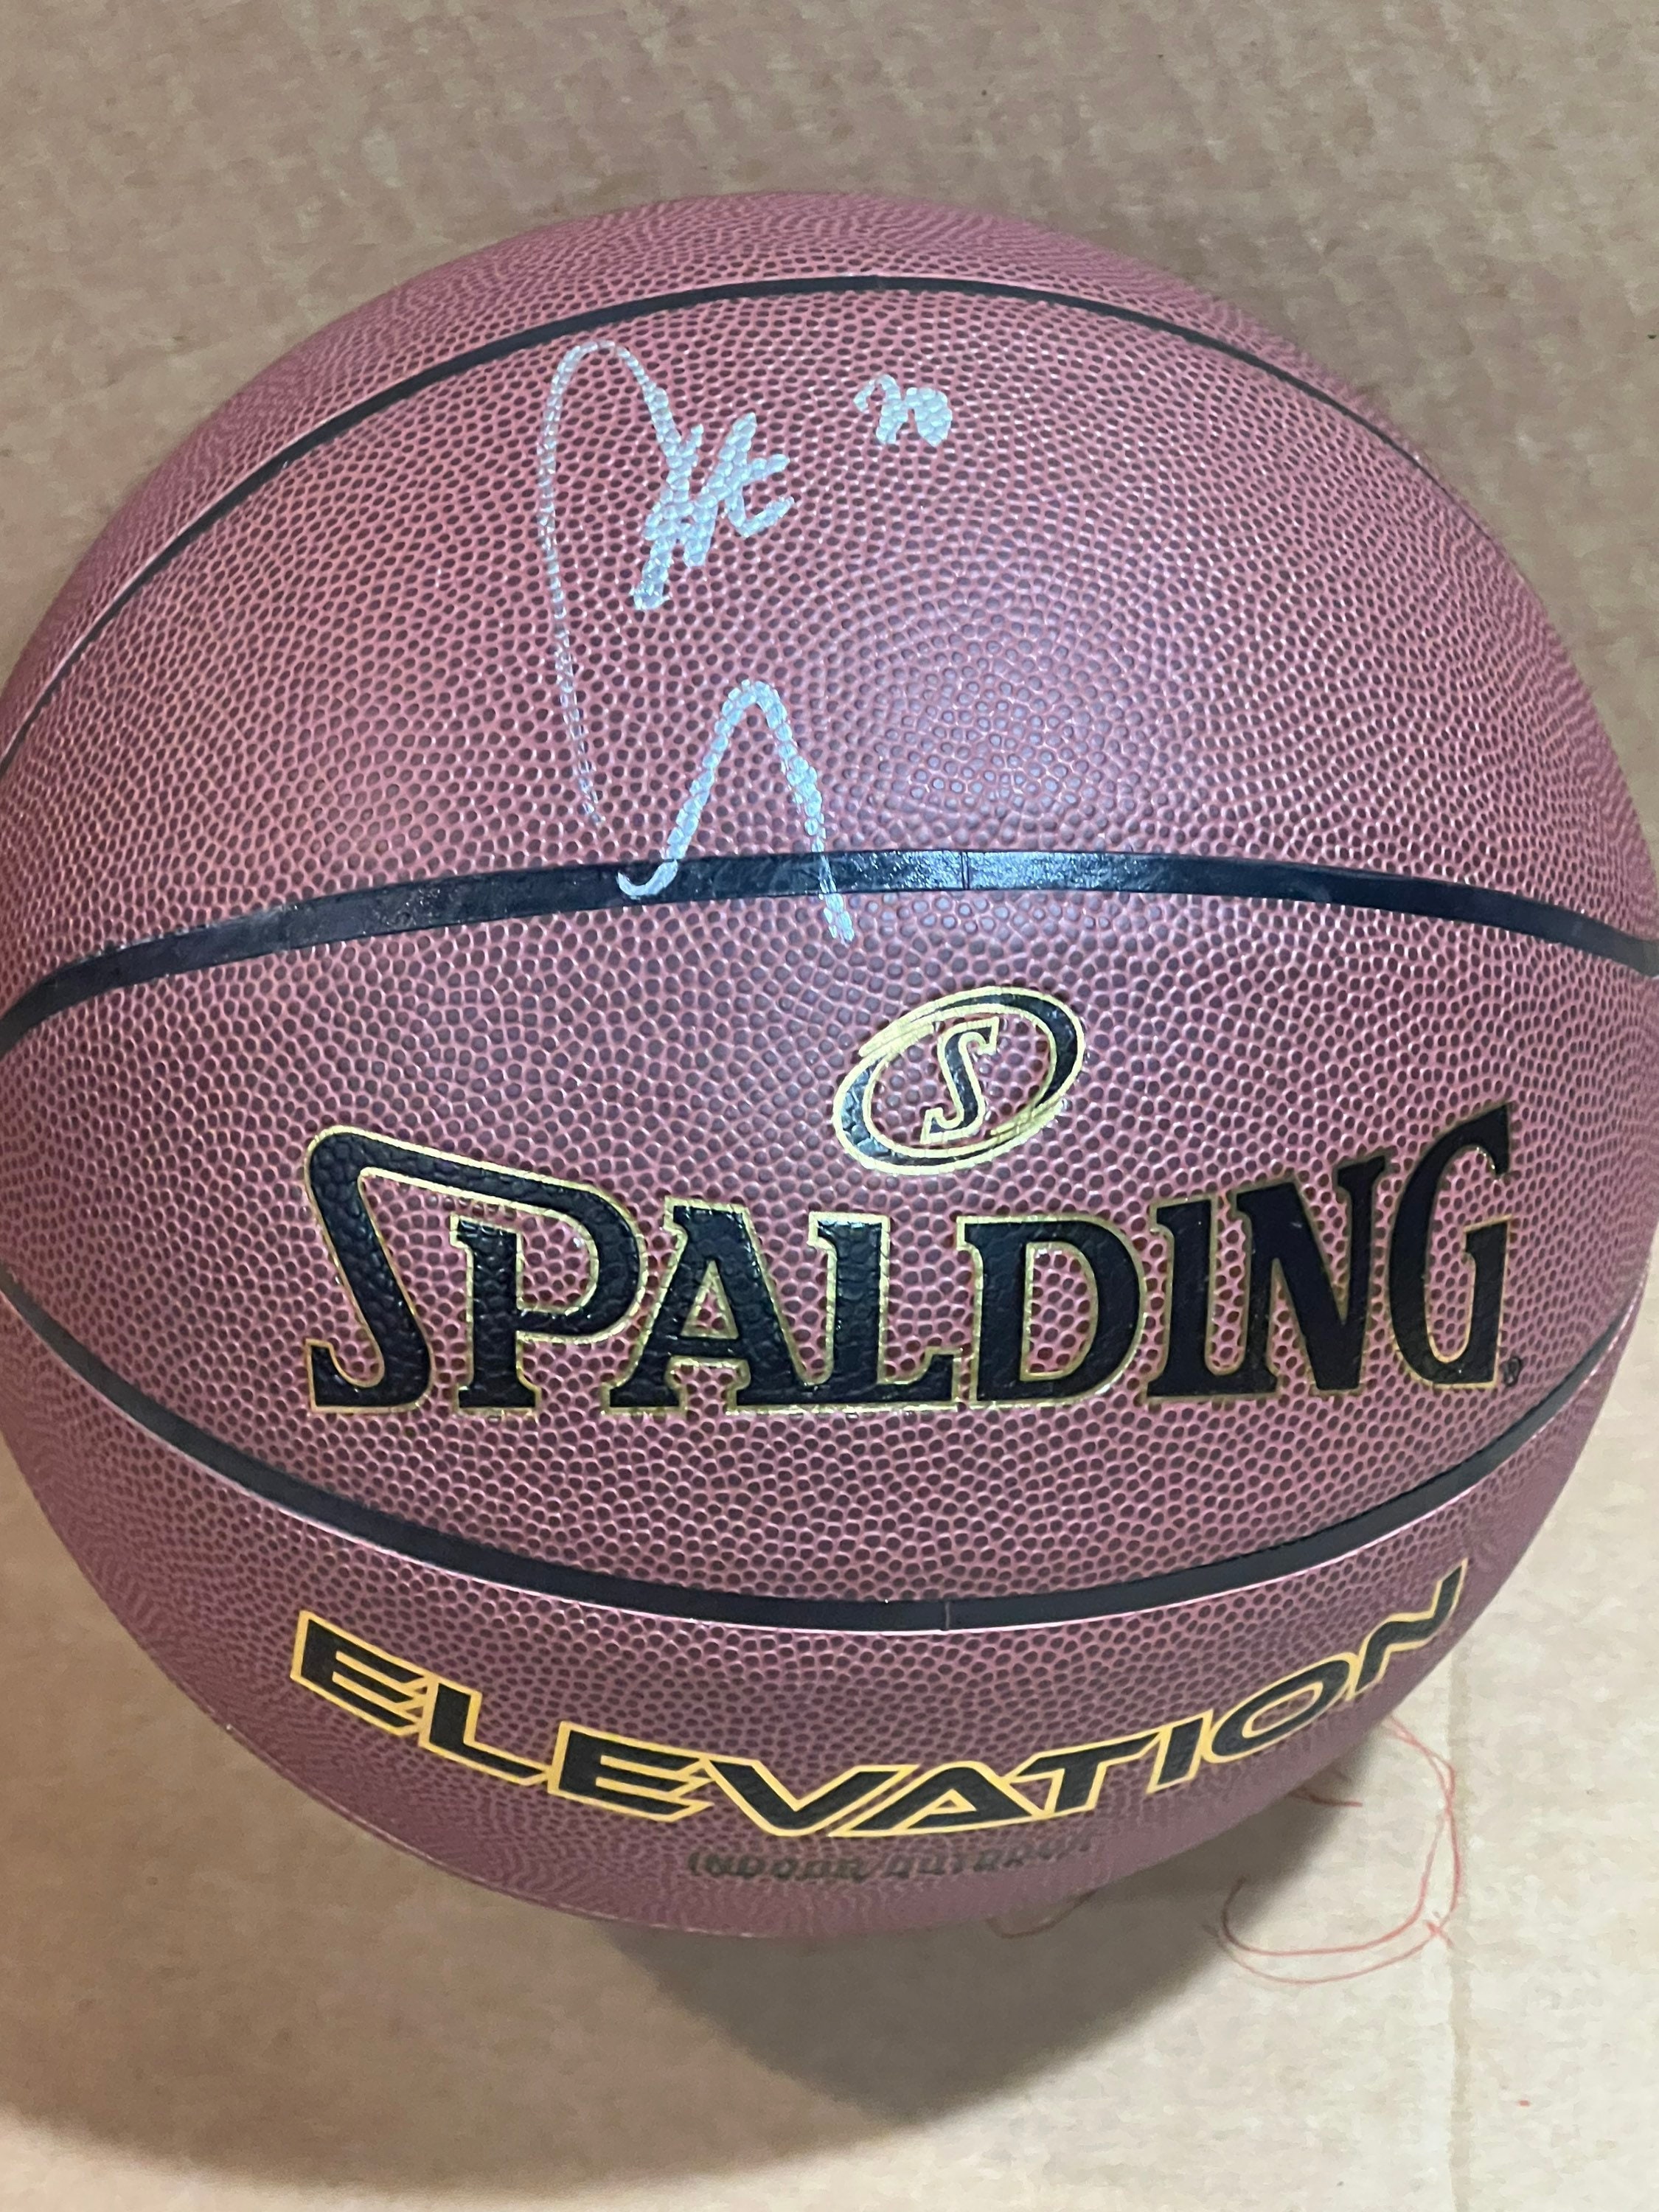 Stephen Curry Signed Basketball Golden State Warriors COA Steph Autograph